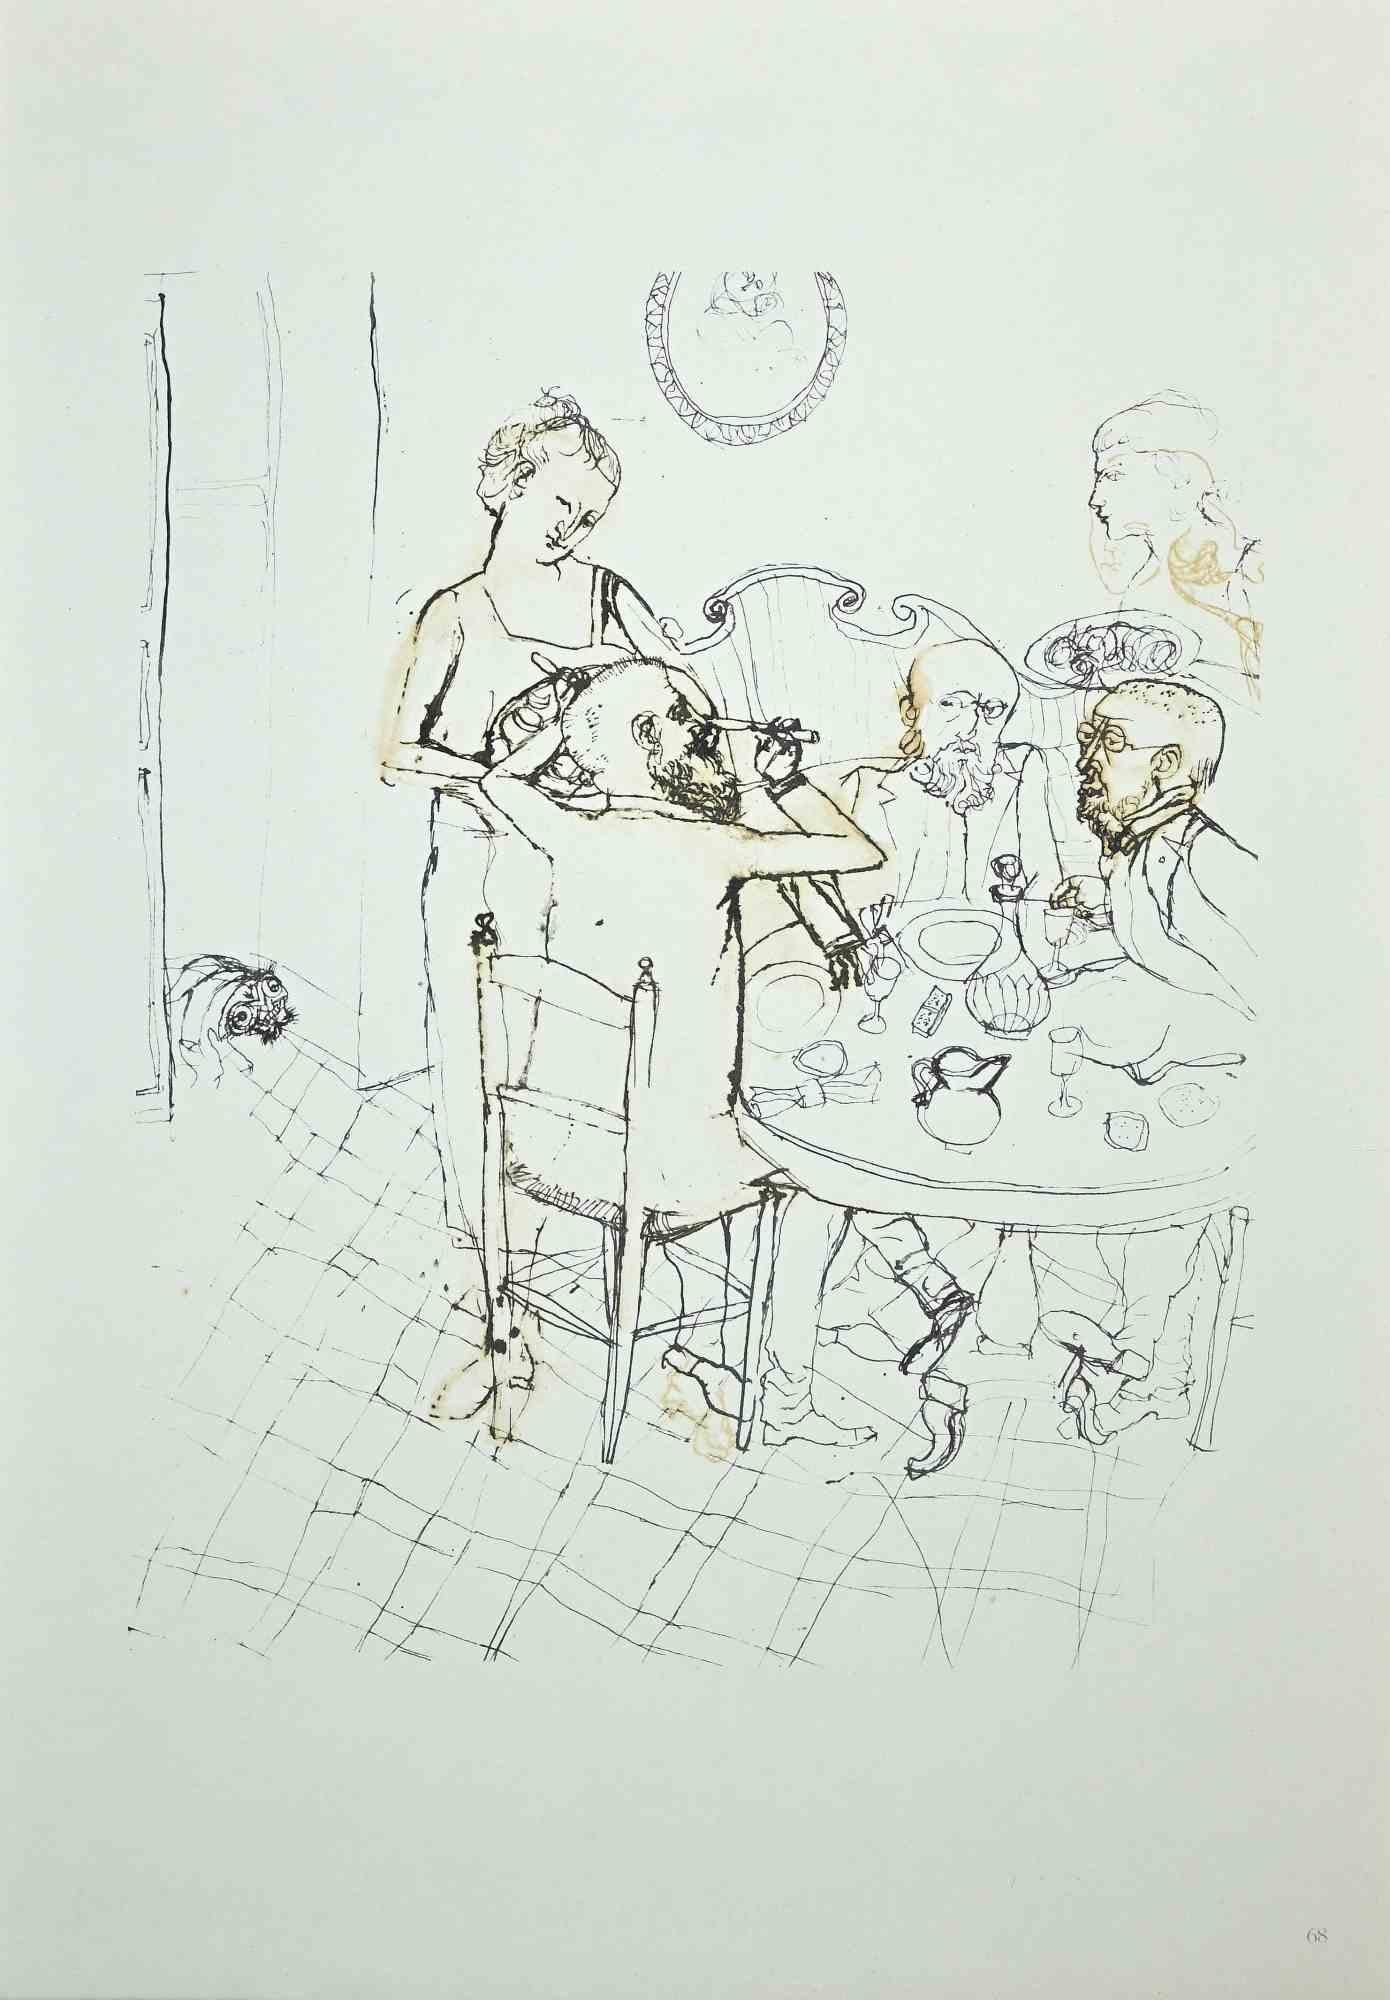 The Dinner is an original vintage offset print on ivory-colored paper, realized by  Franco Gentilini ( Italian Painter, 1909-1981), in 1970s.

The state of preservation of the artwork is excellent.

Franco Gentilini ( Italian Painter, 1909-1981):